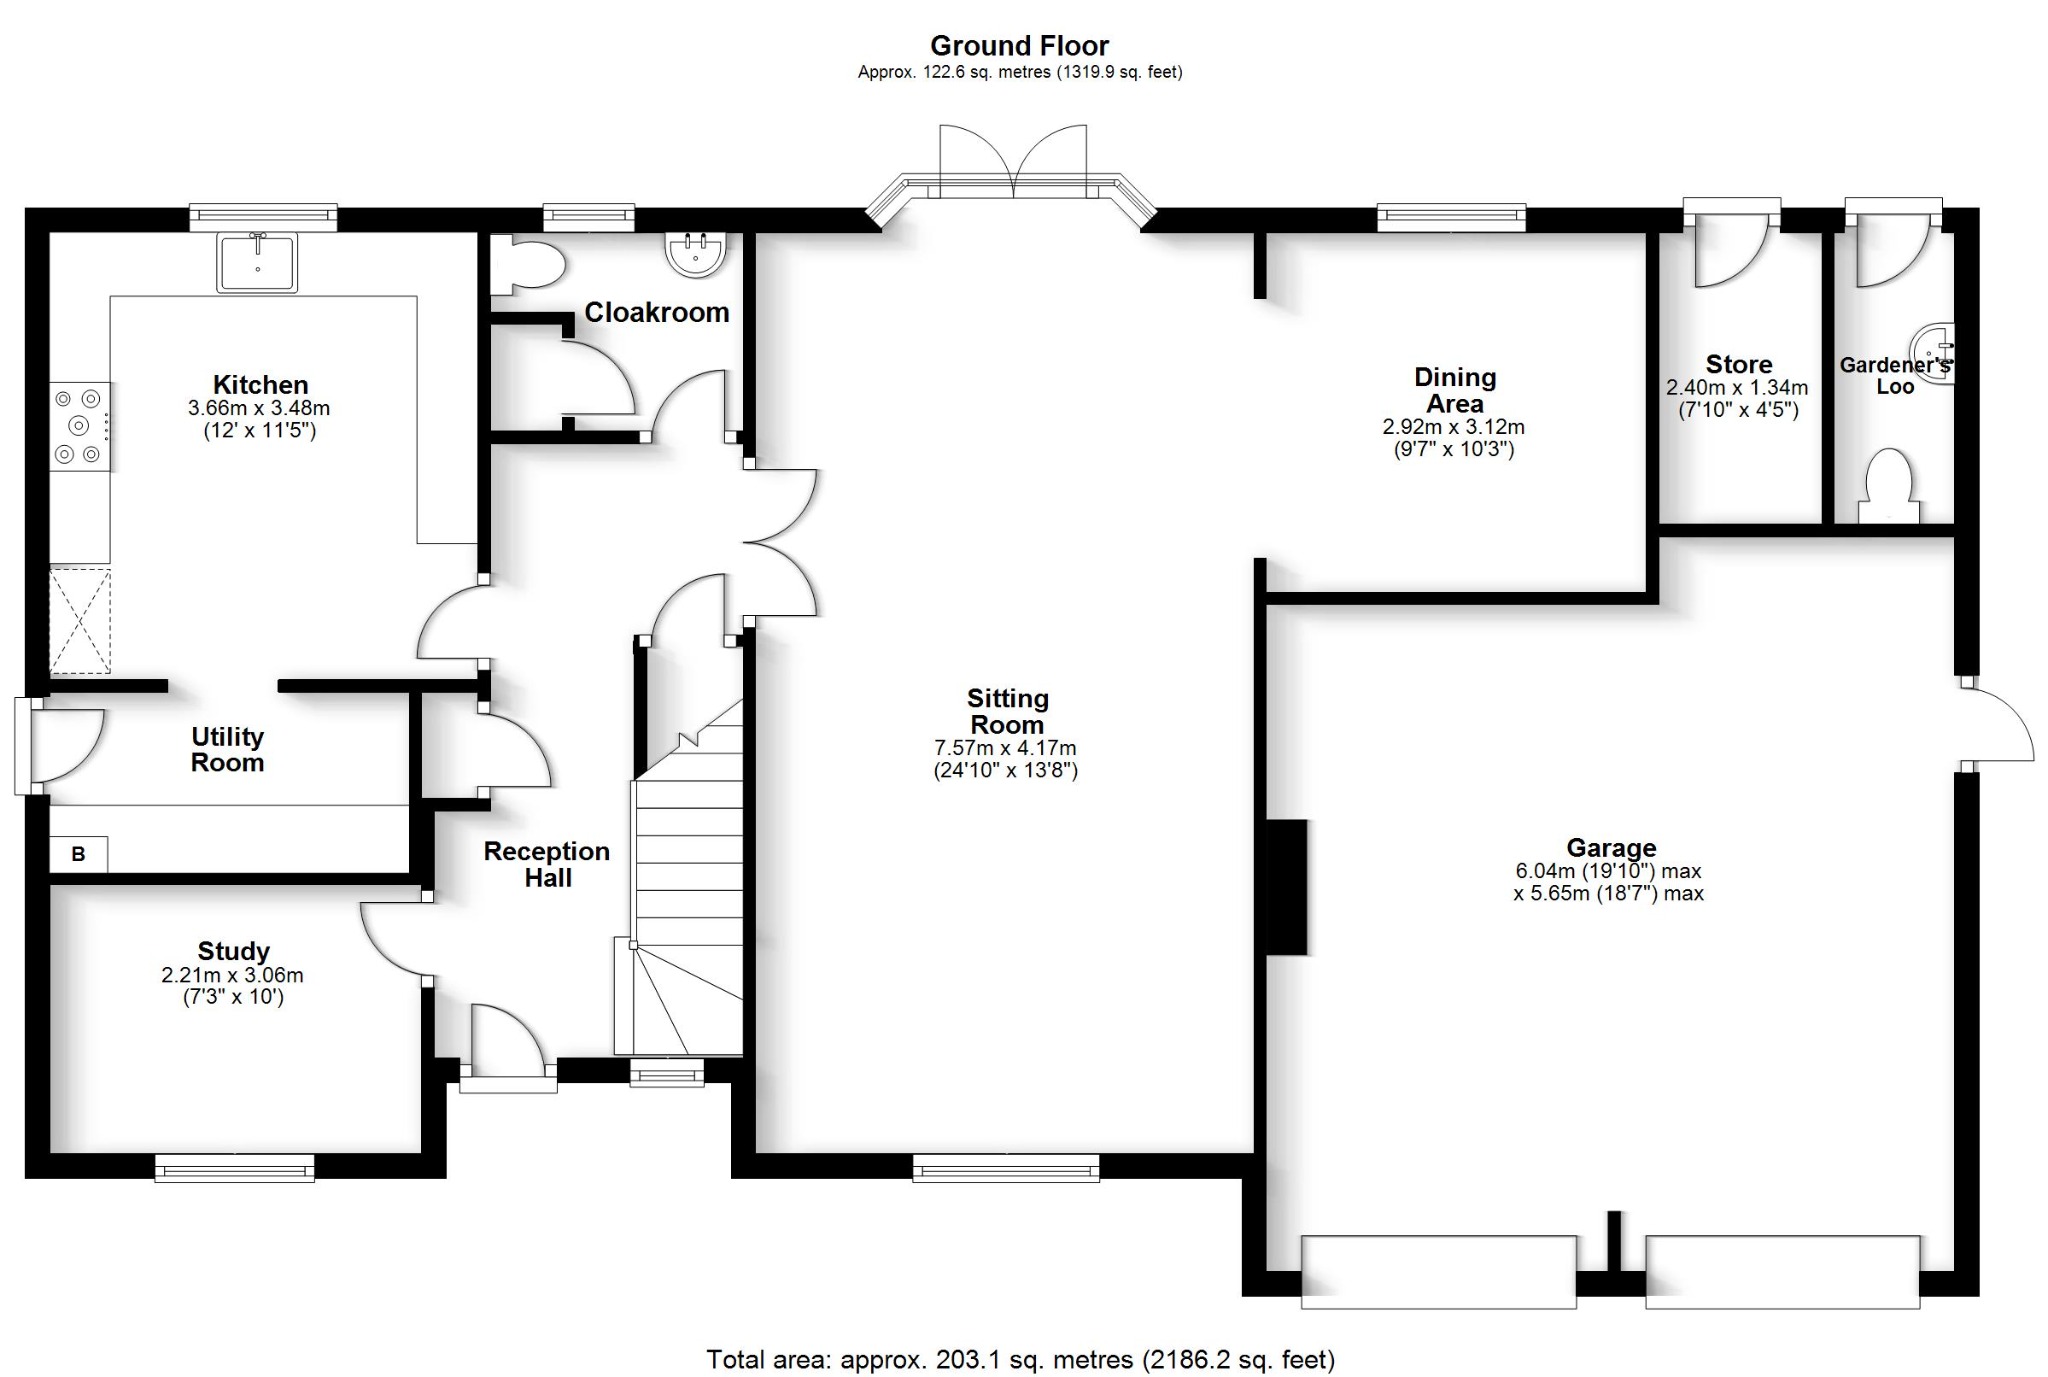 4 bed detached house for sale in Sarisbury Green, Southampton - Property floorplan